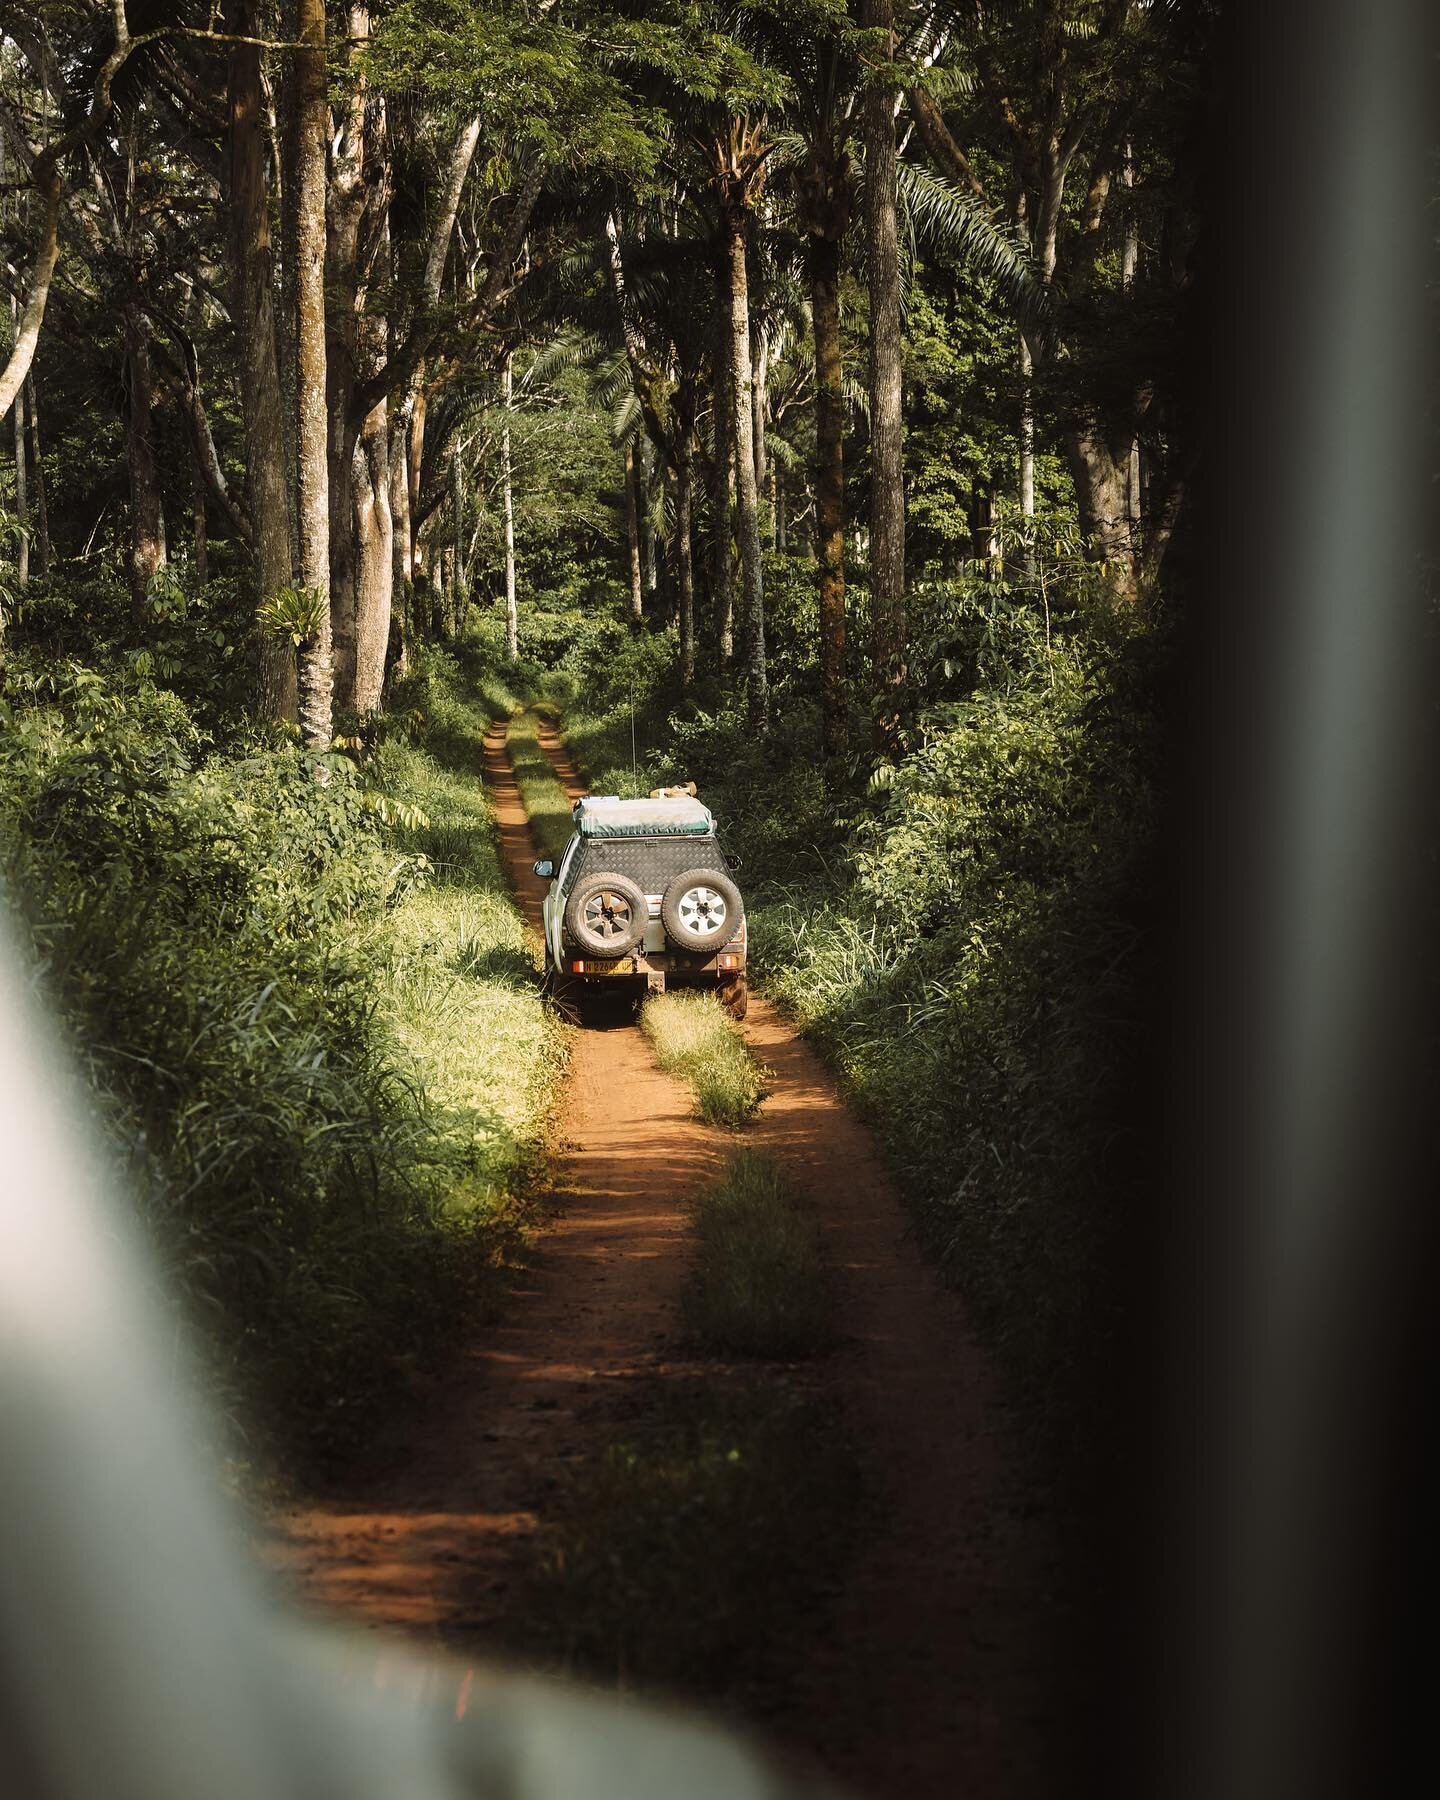 Yesterday we arrived at a massive coffee plantation which takes around 90 minutes to cross. Absolutely loved driving on those dirt roads in the middle of dense vegetation. Angola has been one heck of an adventure so far 🤙🏻

Edited with @care4art.co